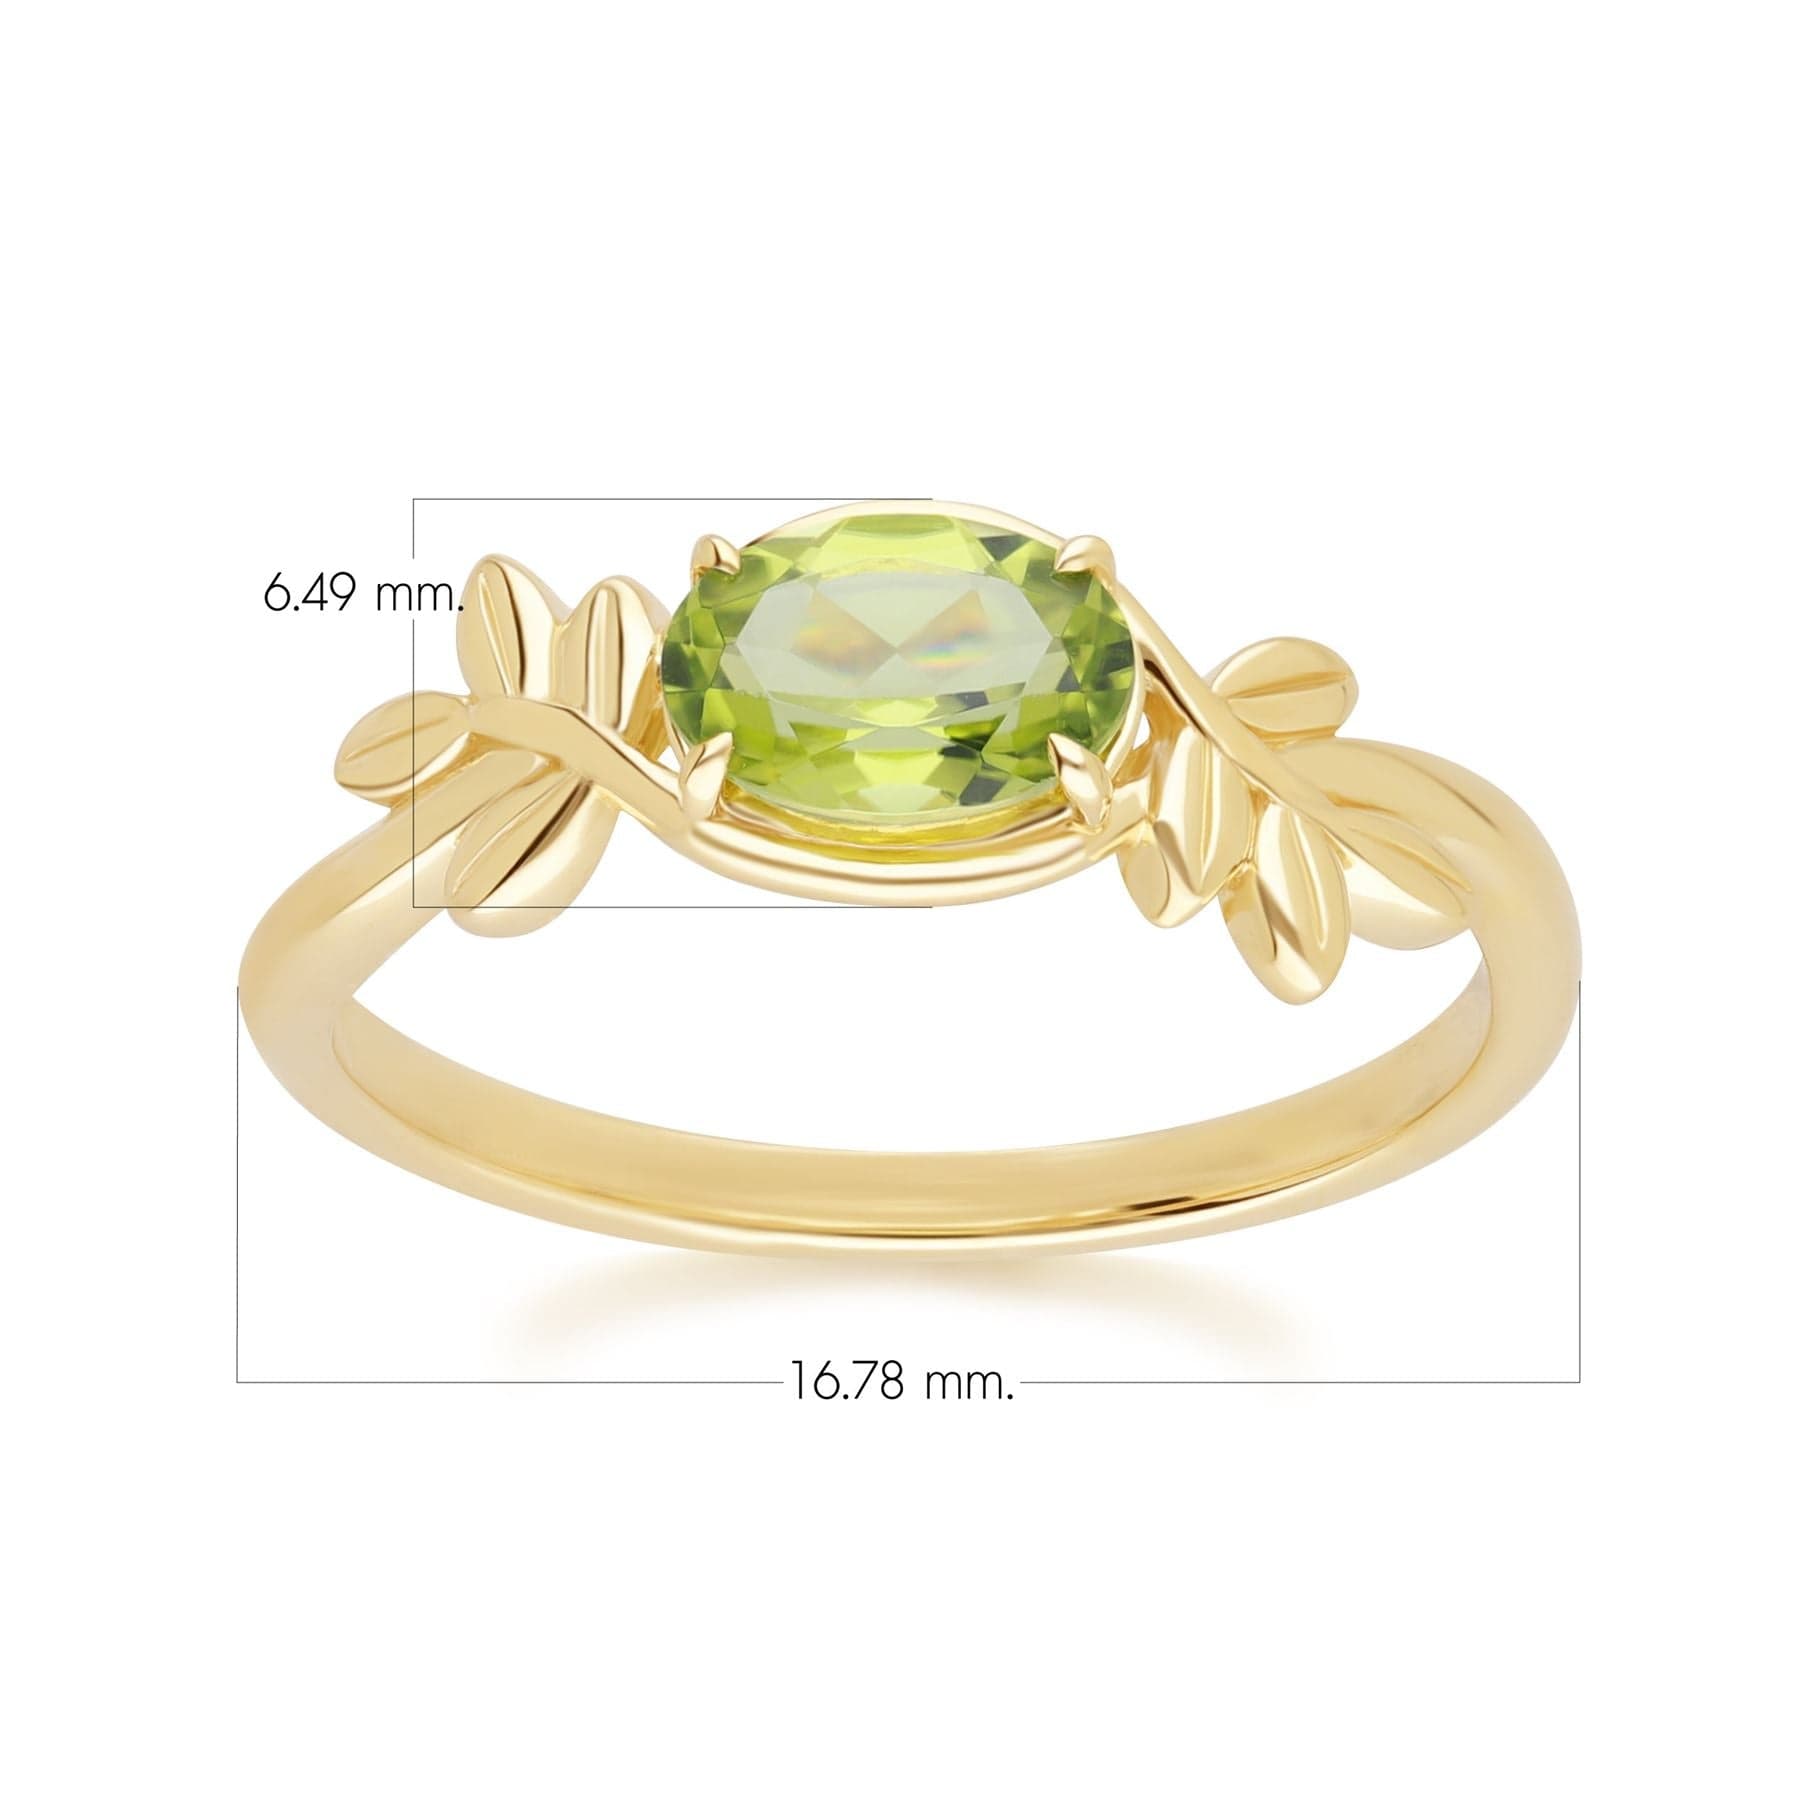 135R2092019 O Leaf Peridot Ring In 9ct Yellow Gold Dimensions